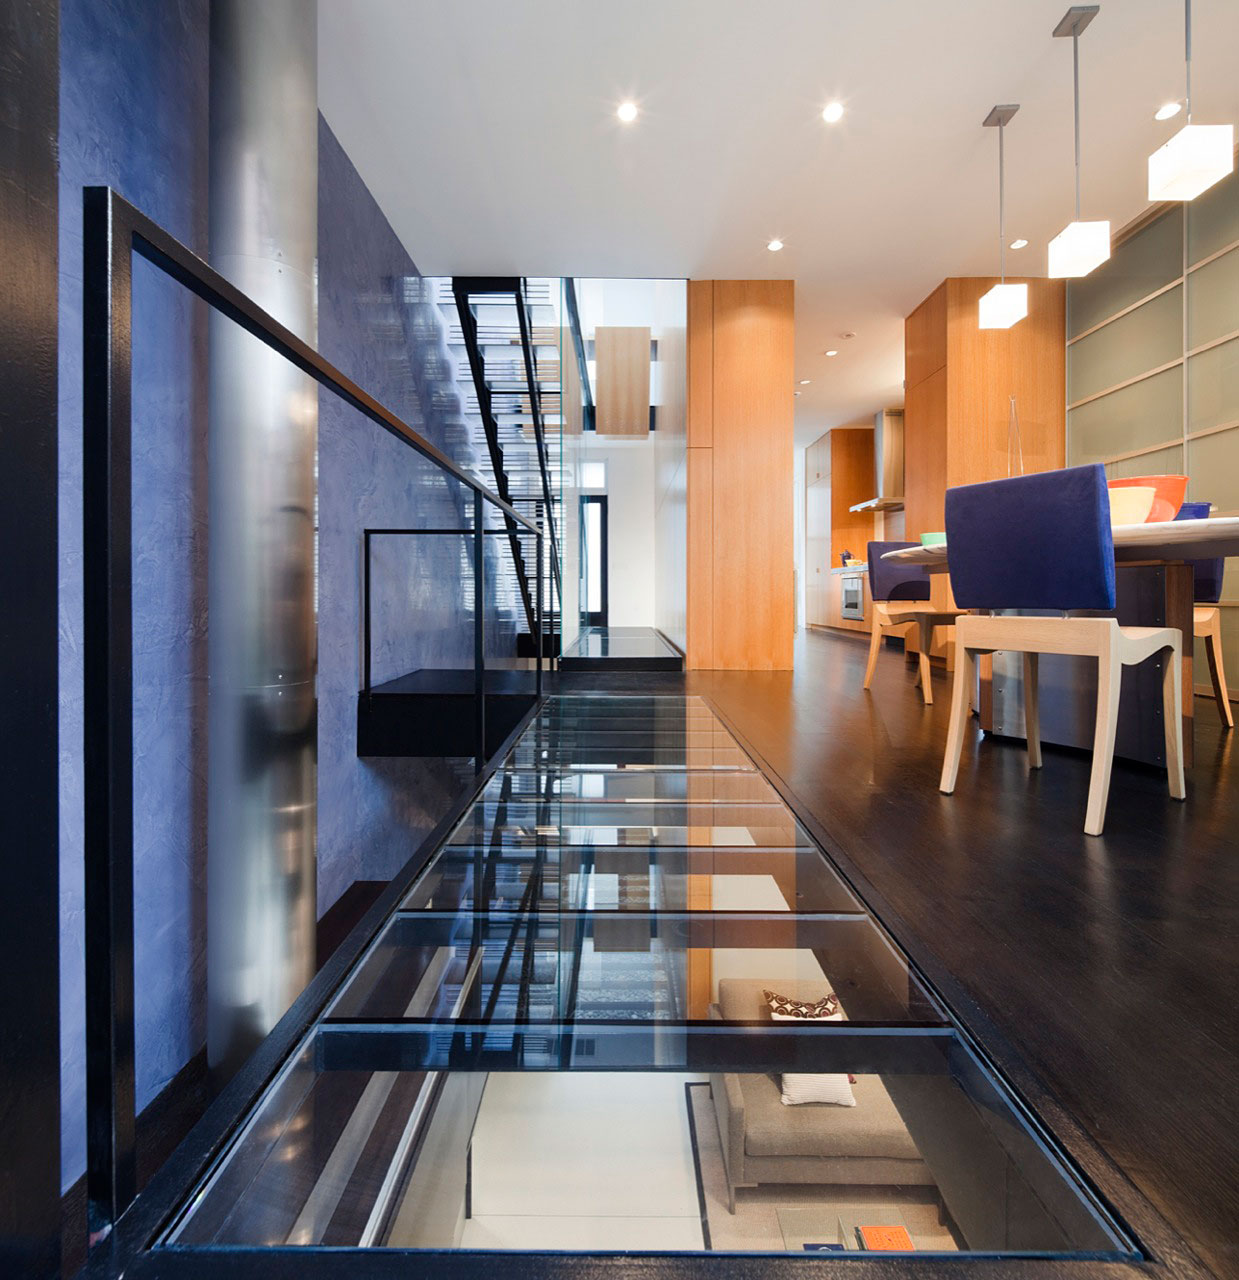 Glass Floor Contemporary Translucent Glass Floor Panels Modern Contemporary Corridor Design With Table And Chairs Ideas Architecture Elegant Row House With Open Plan Contemporary Space